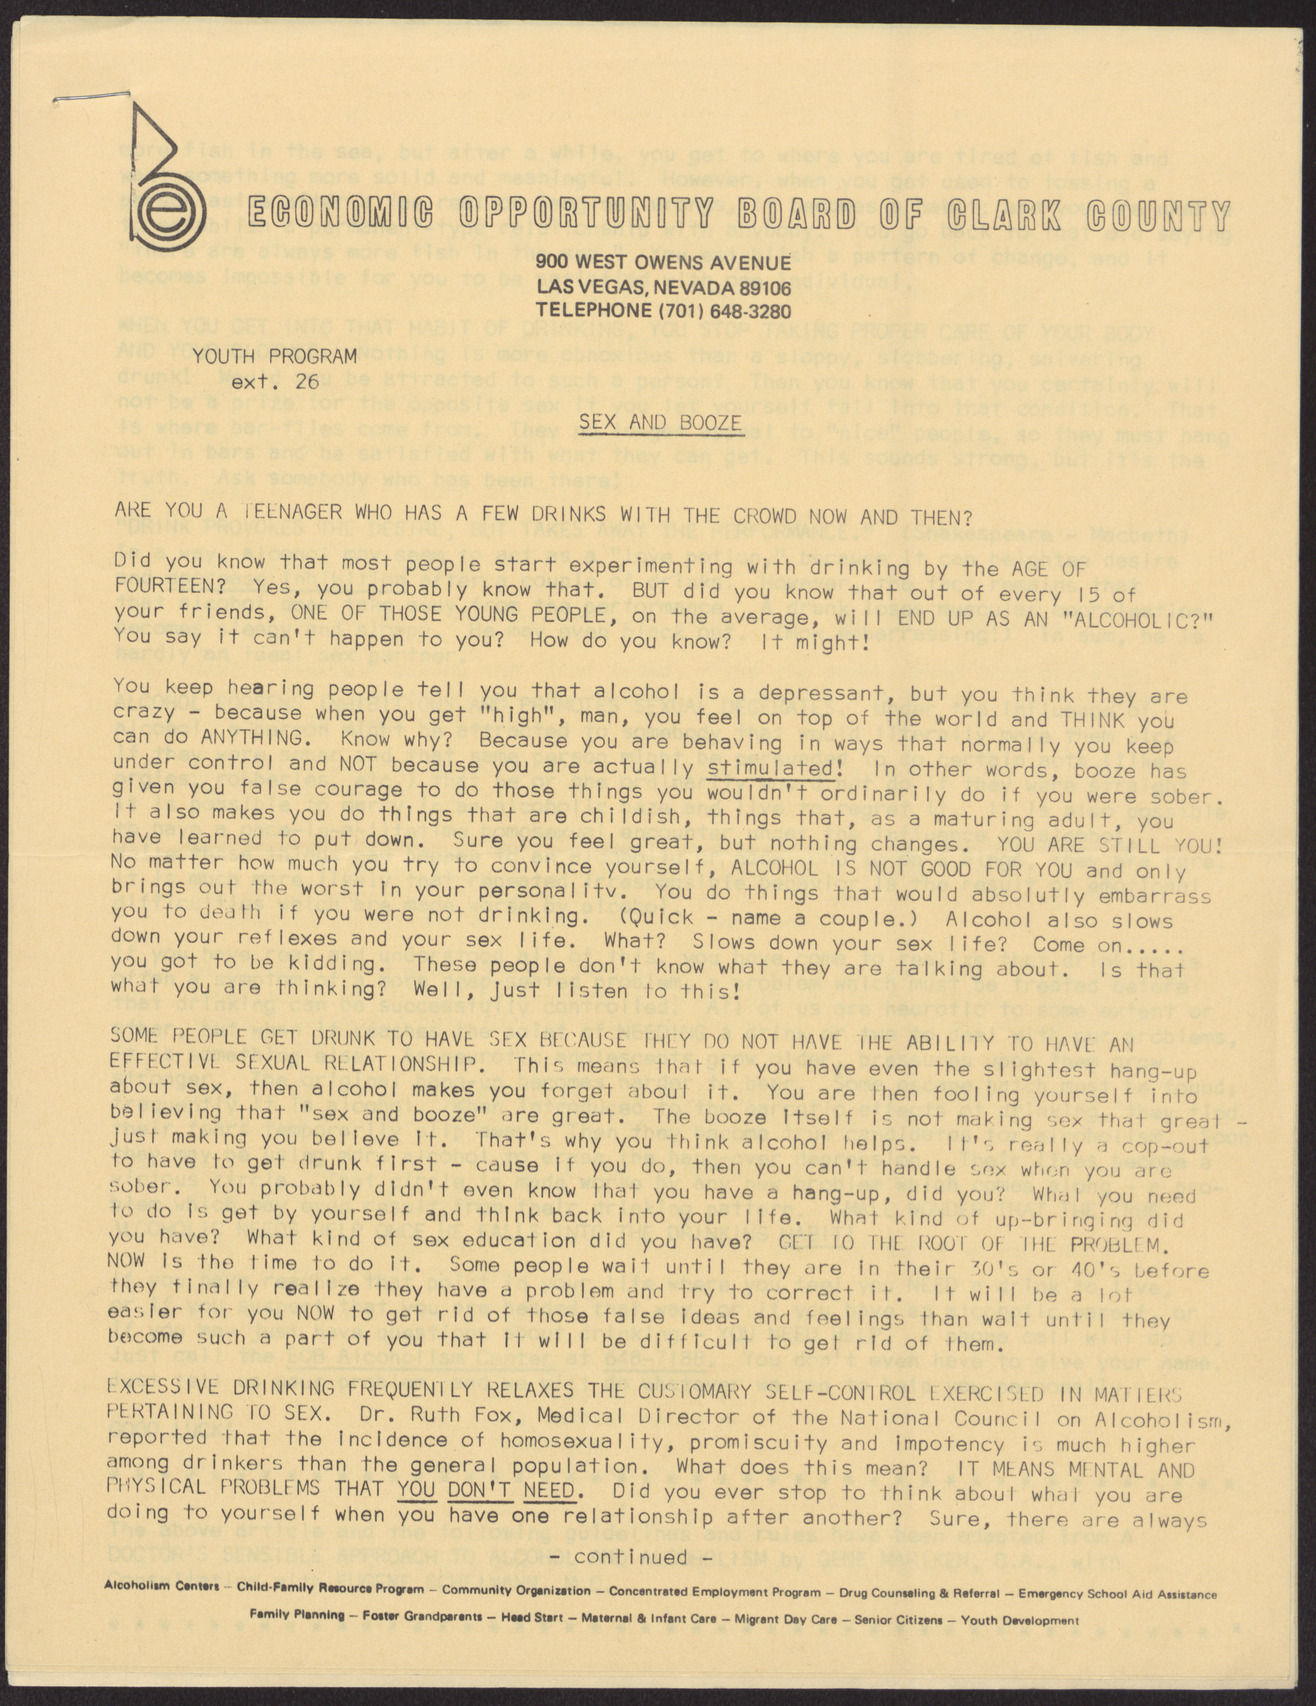 Article for the EOB Youth Program entitled "Sex and Booze" (4 pages), no date